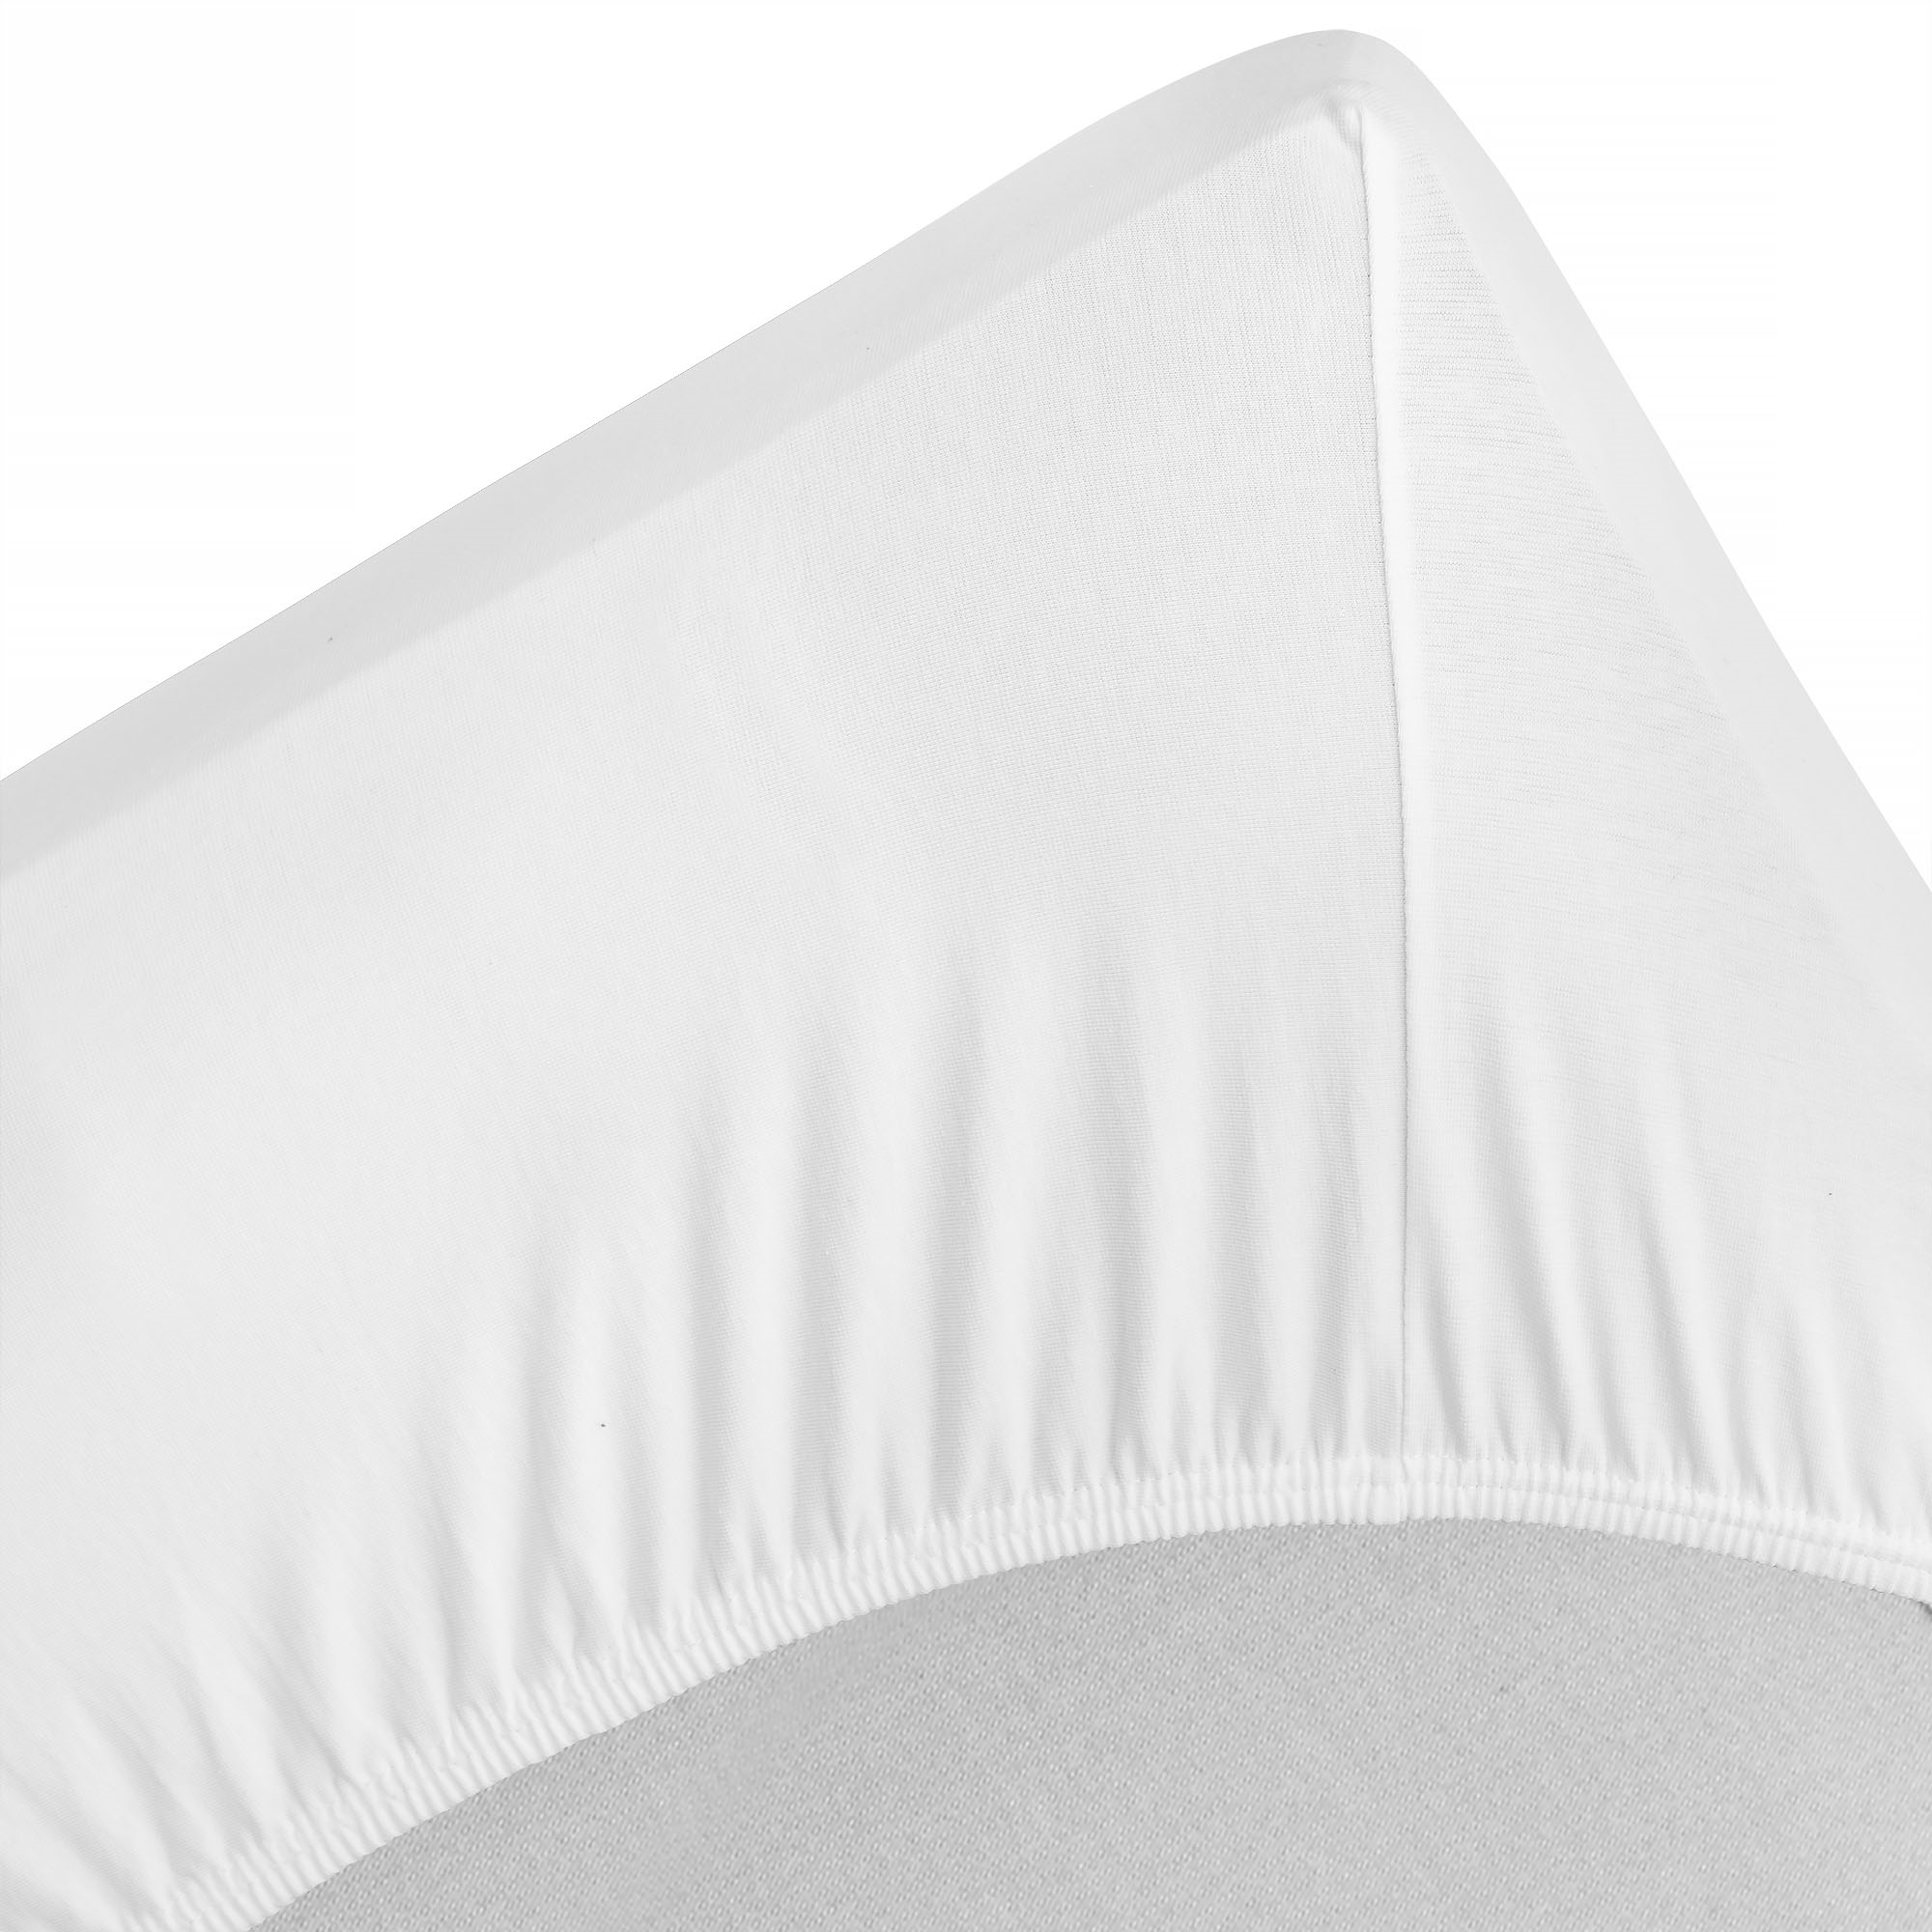 Mattress Cover, fitted sheet 140x200 cm white